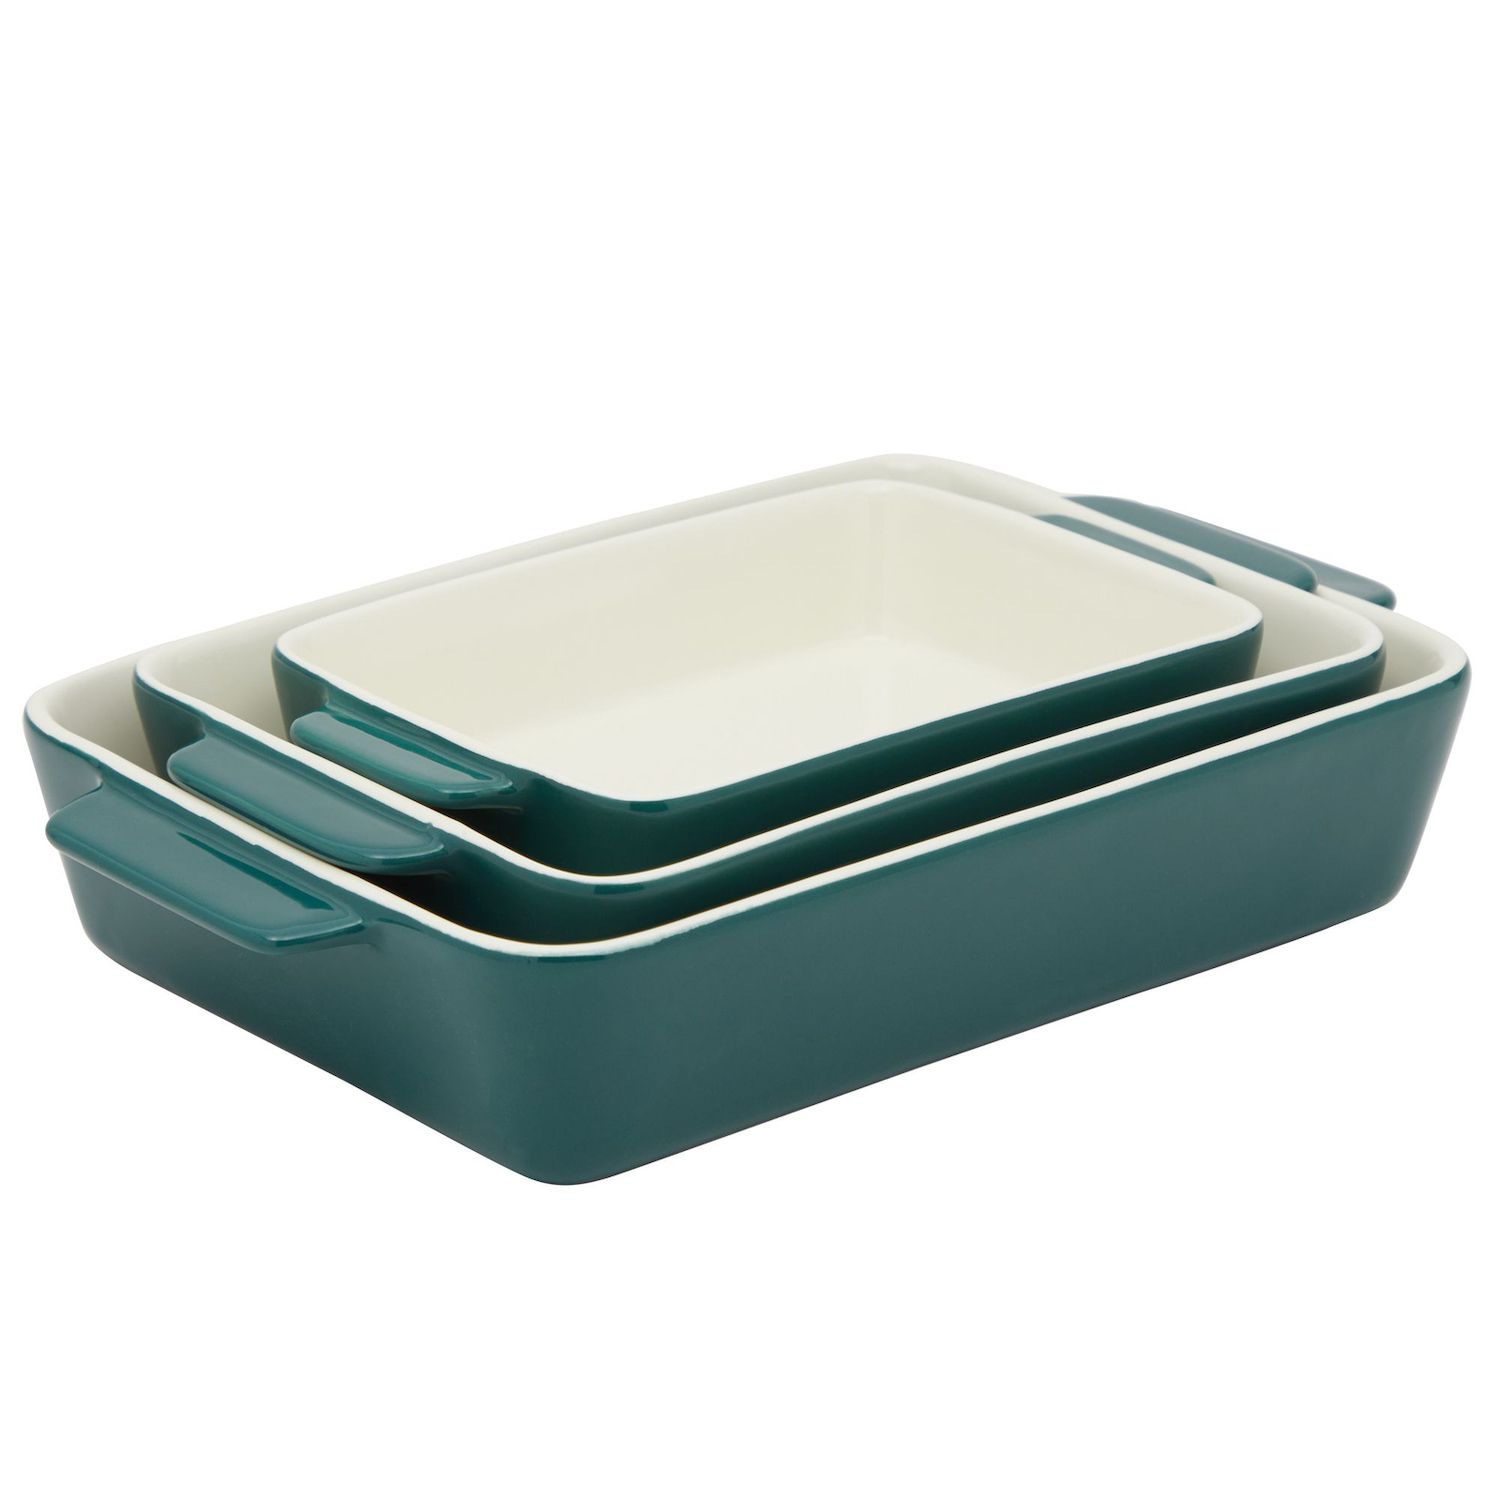 Rubbermaid DuraLite Glass Bakeware, 1.75 qt Square Baking Dish with Blue Lid